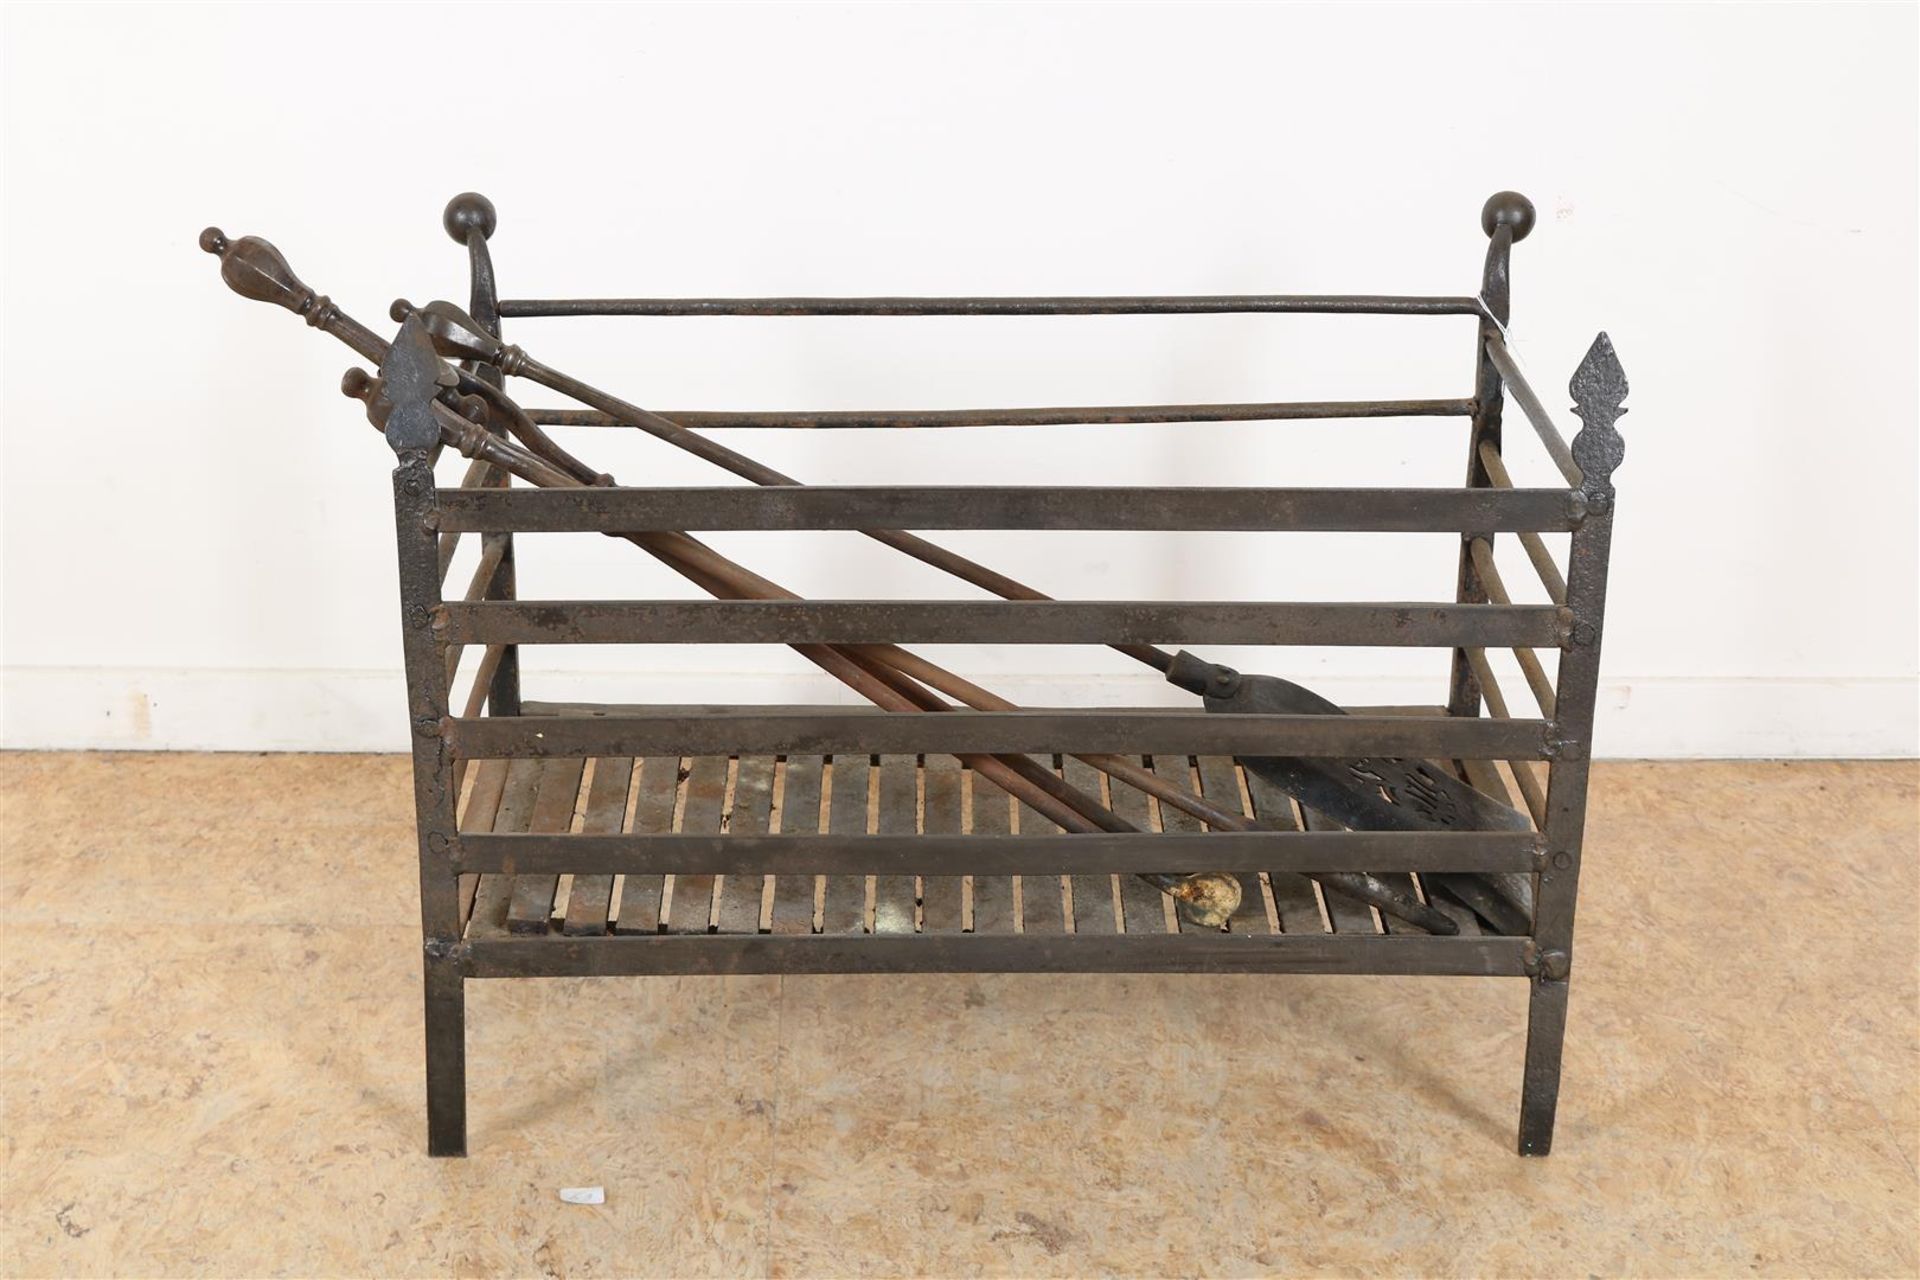 Wrought iron fireplace grate with 3 piece fireplace set, including shovel and tongs, 45 x 57 x 29